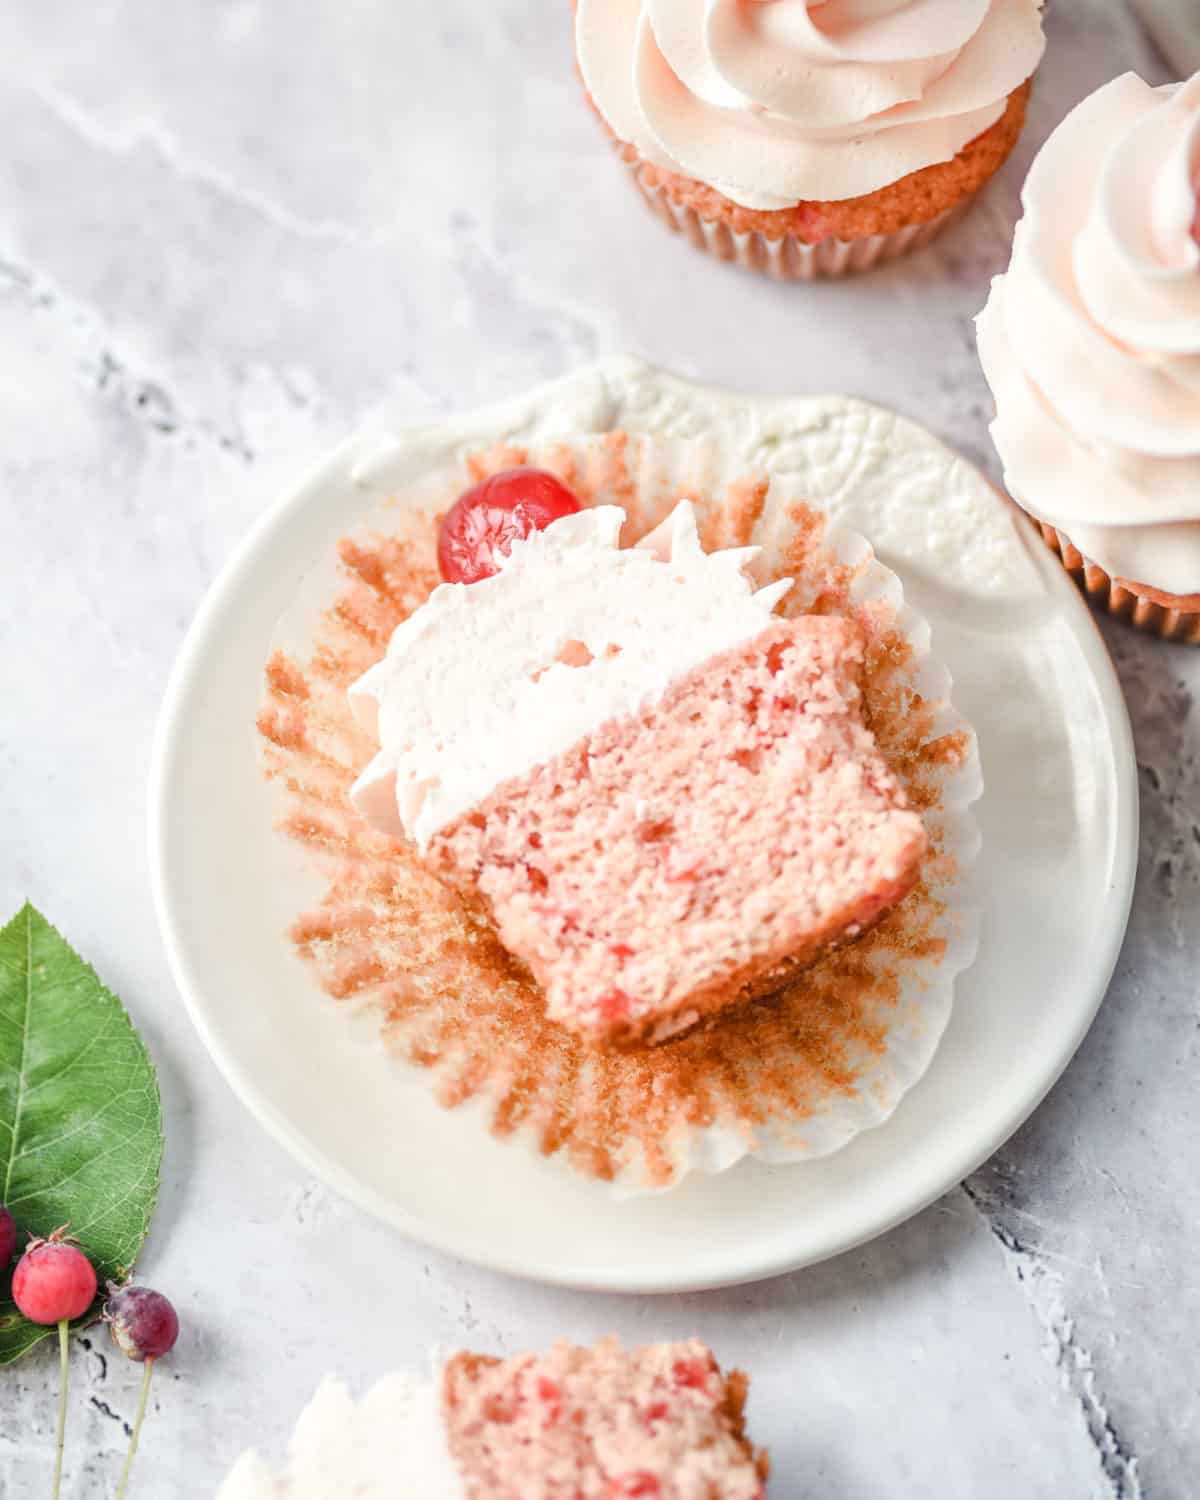 Overhead shot of a cupcake sliced in half showing its inside.